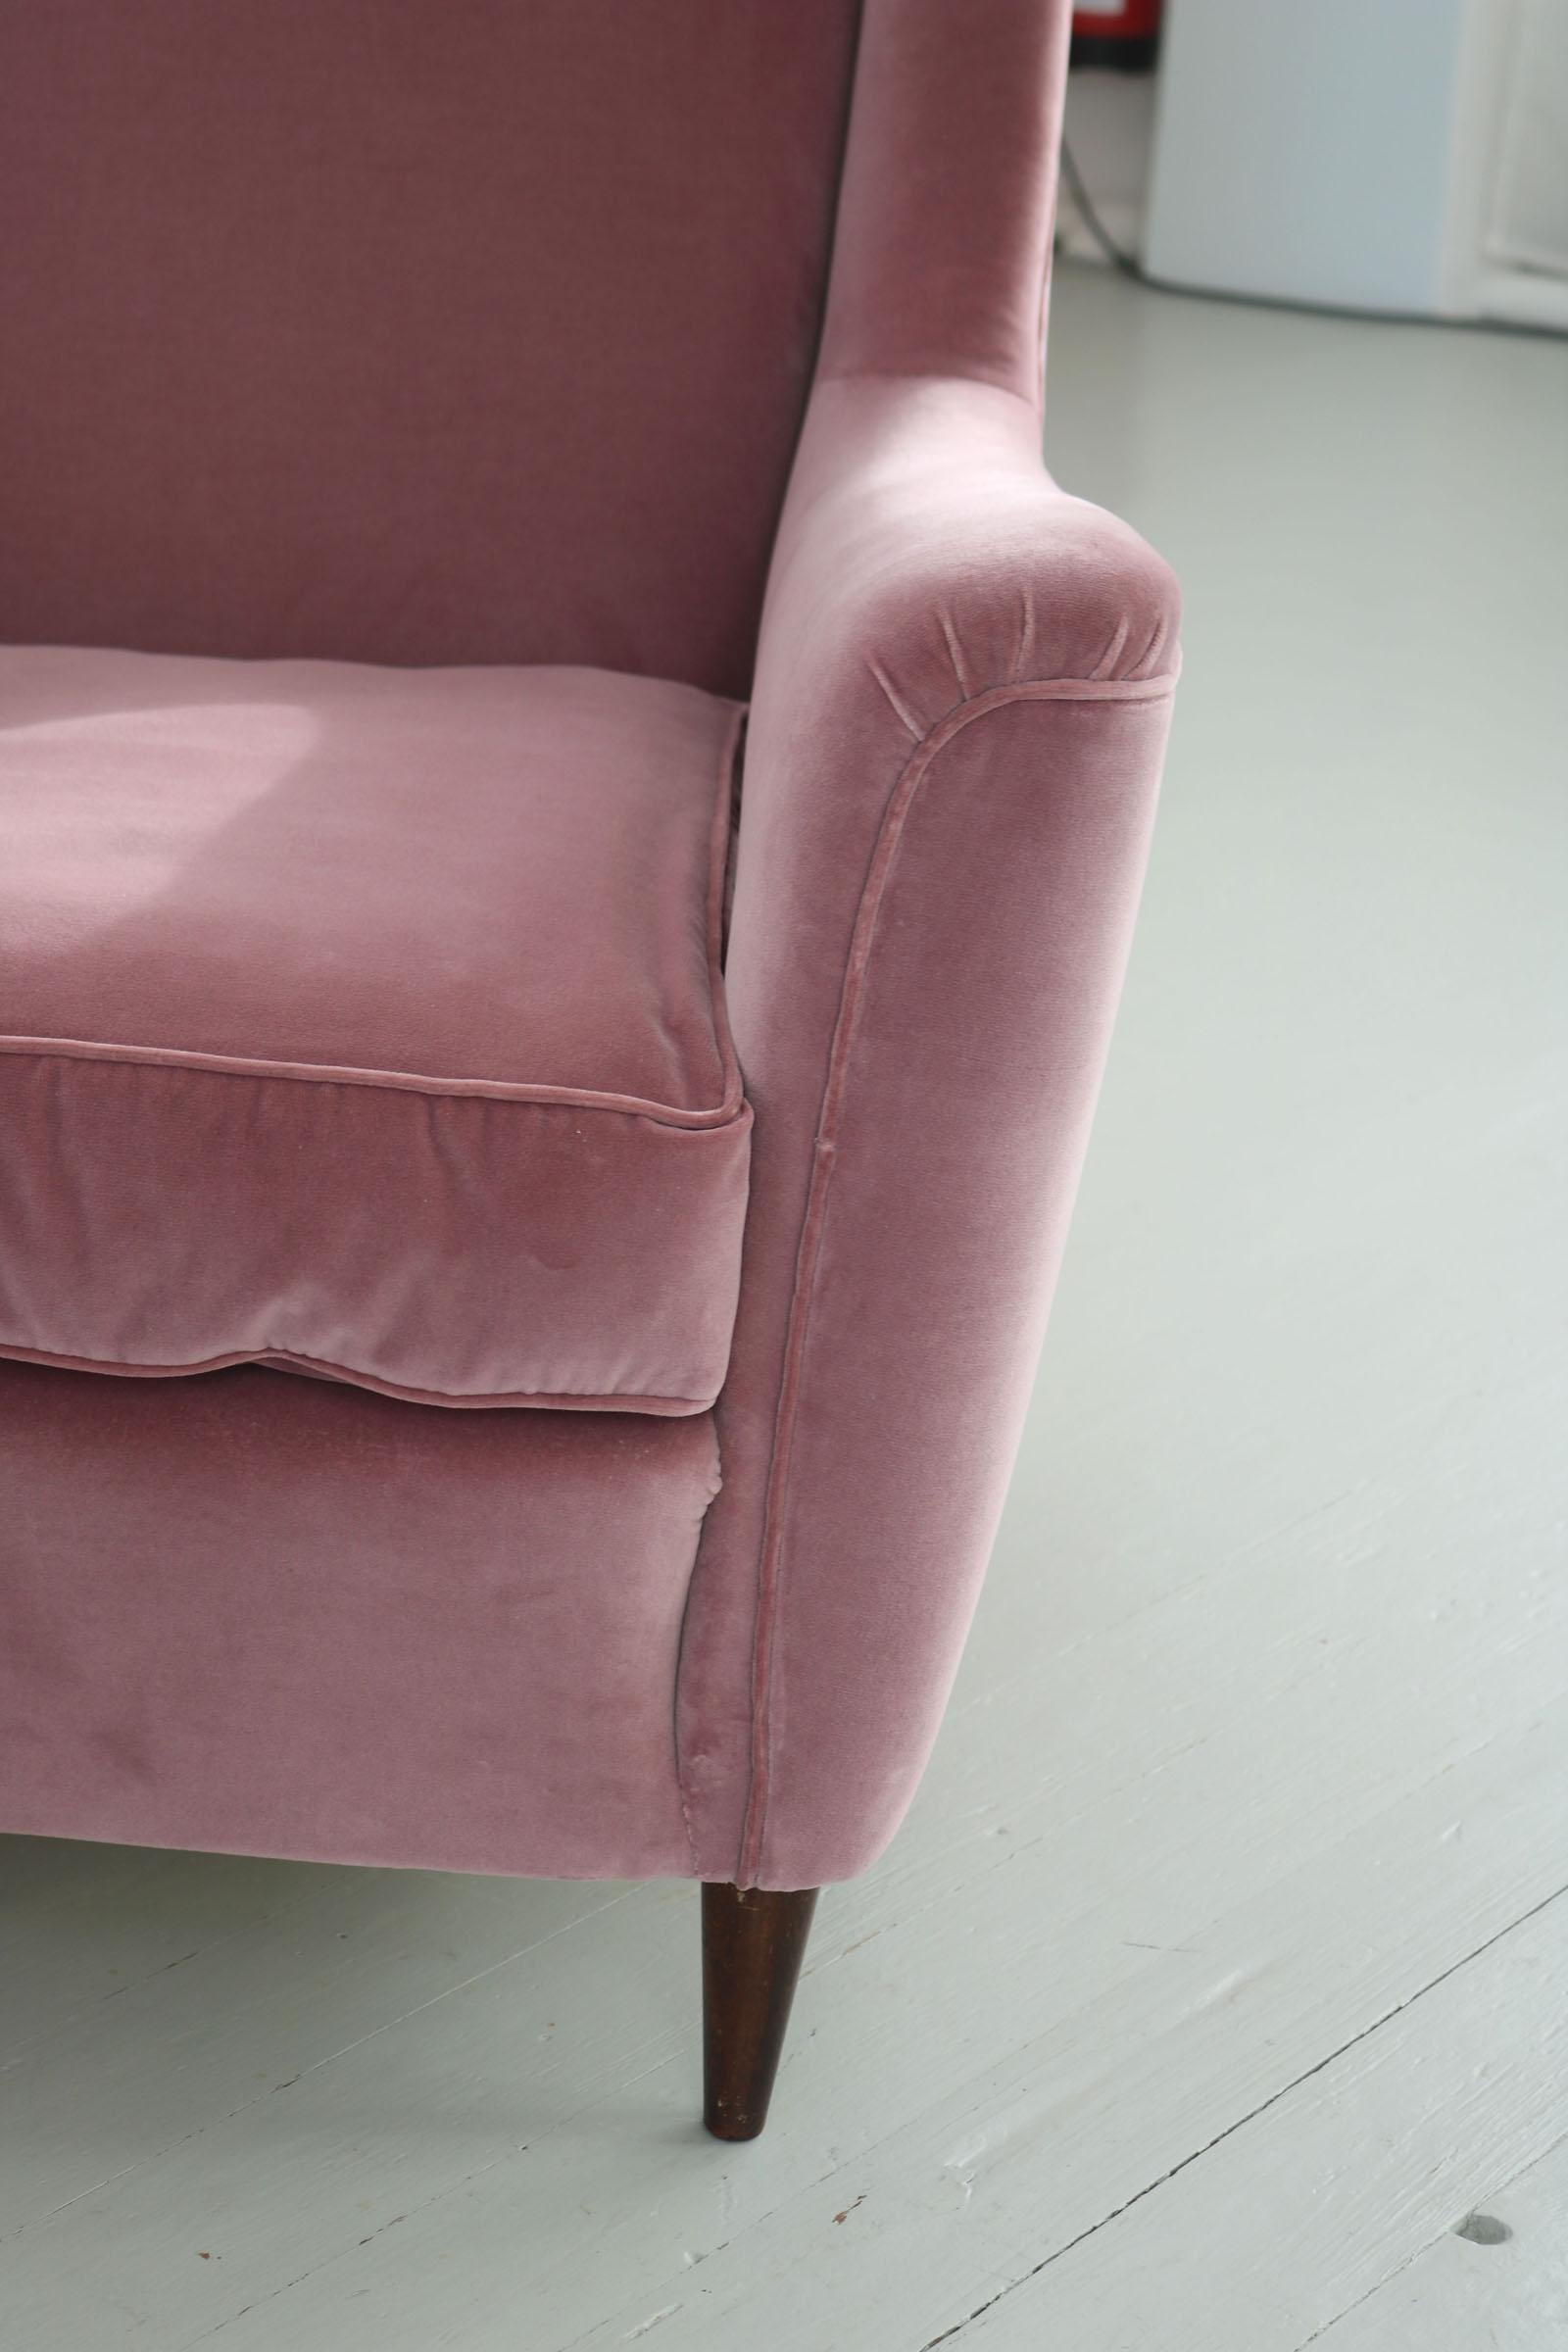 Light Rose Ico Parisi Armchair, 1950s, Italy For Sale 4